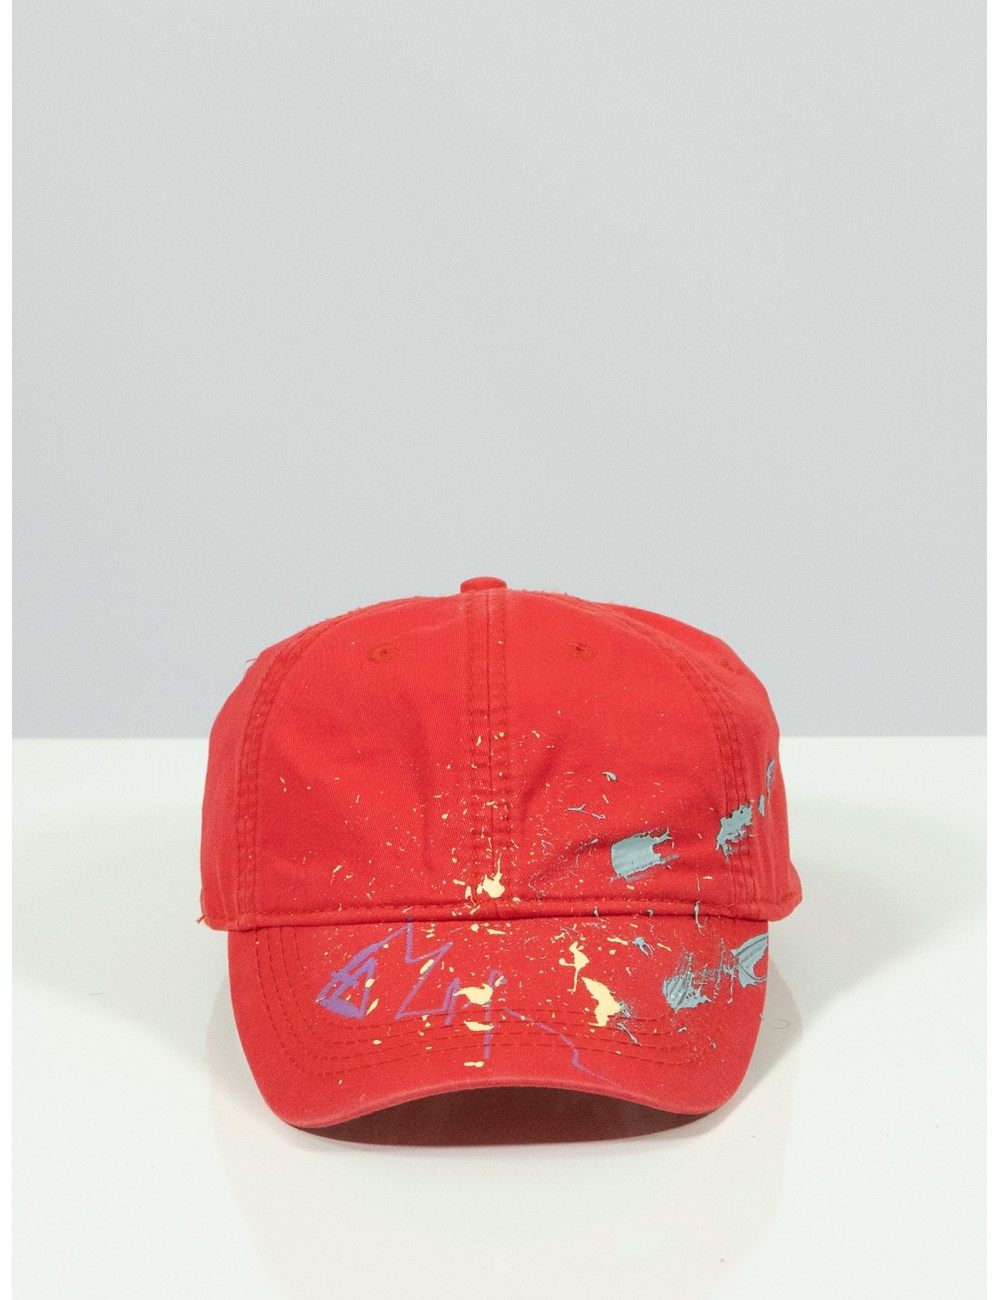 Upcycled red hat x Mira